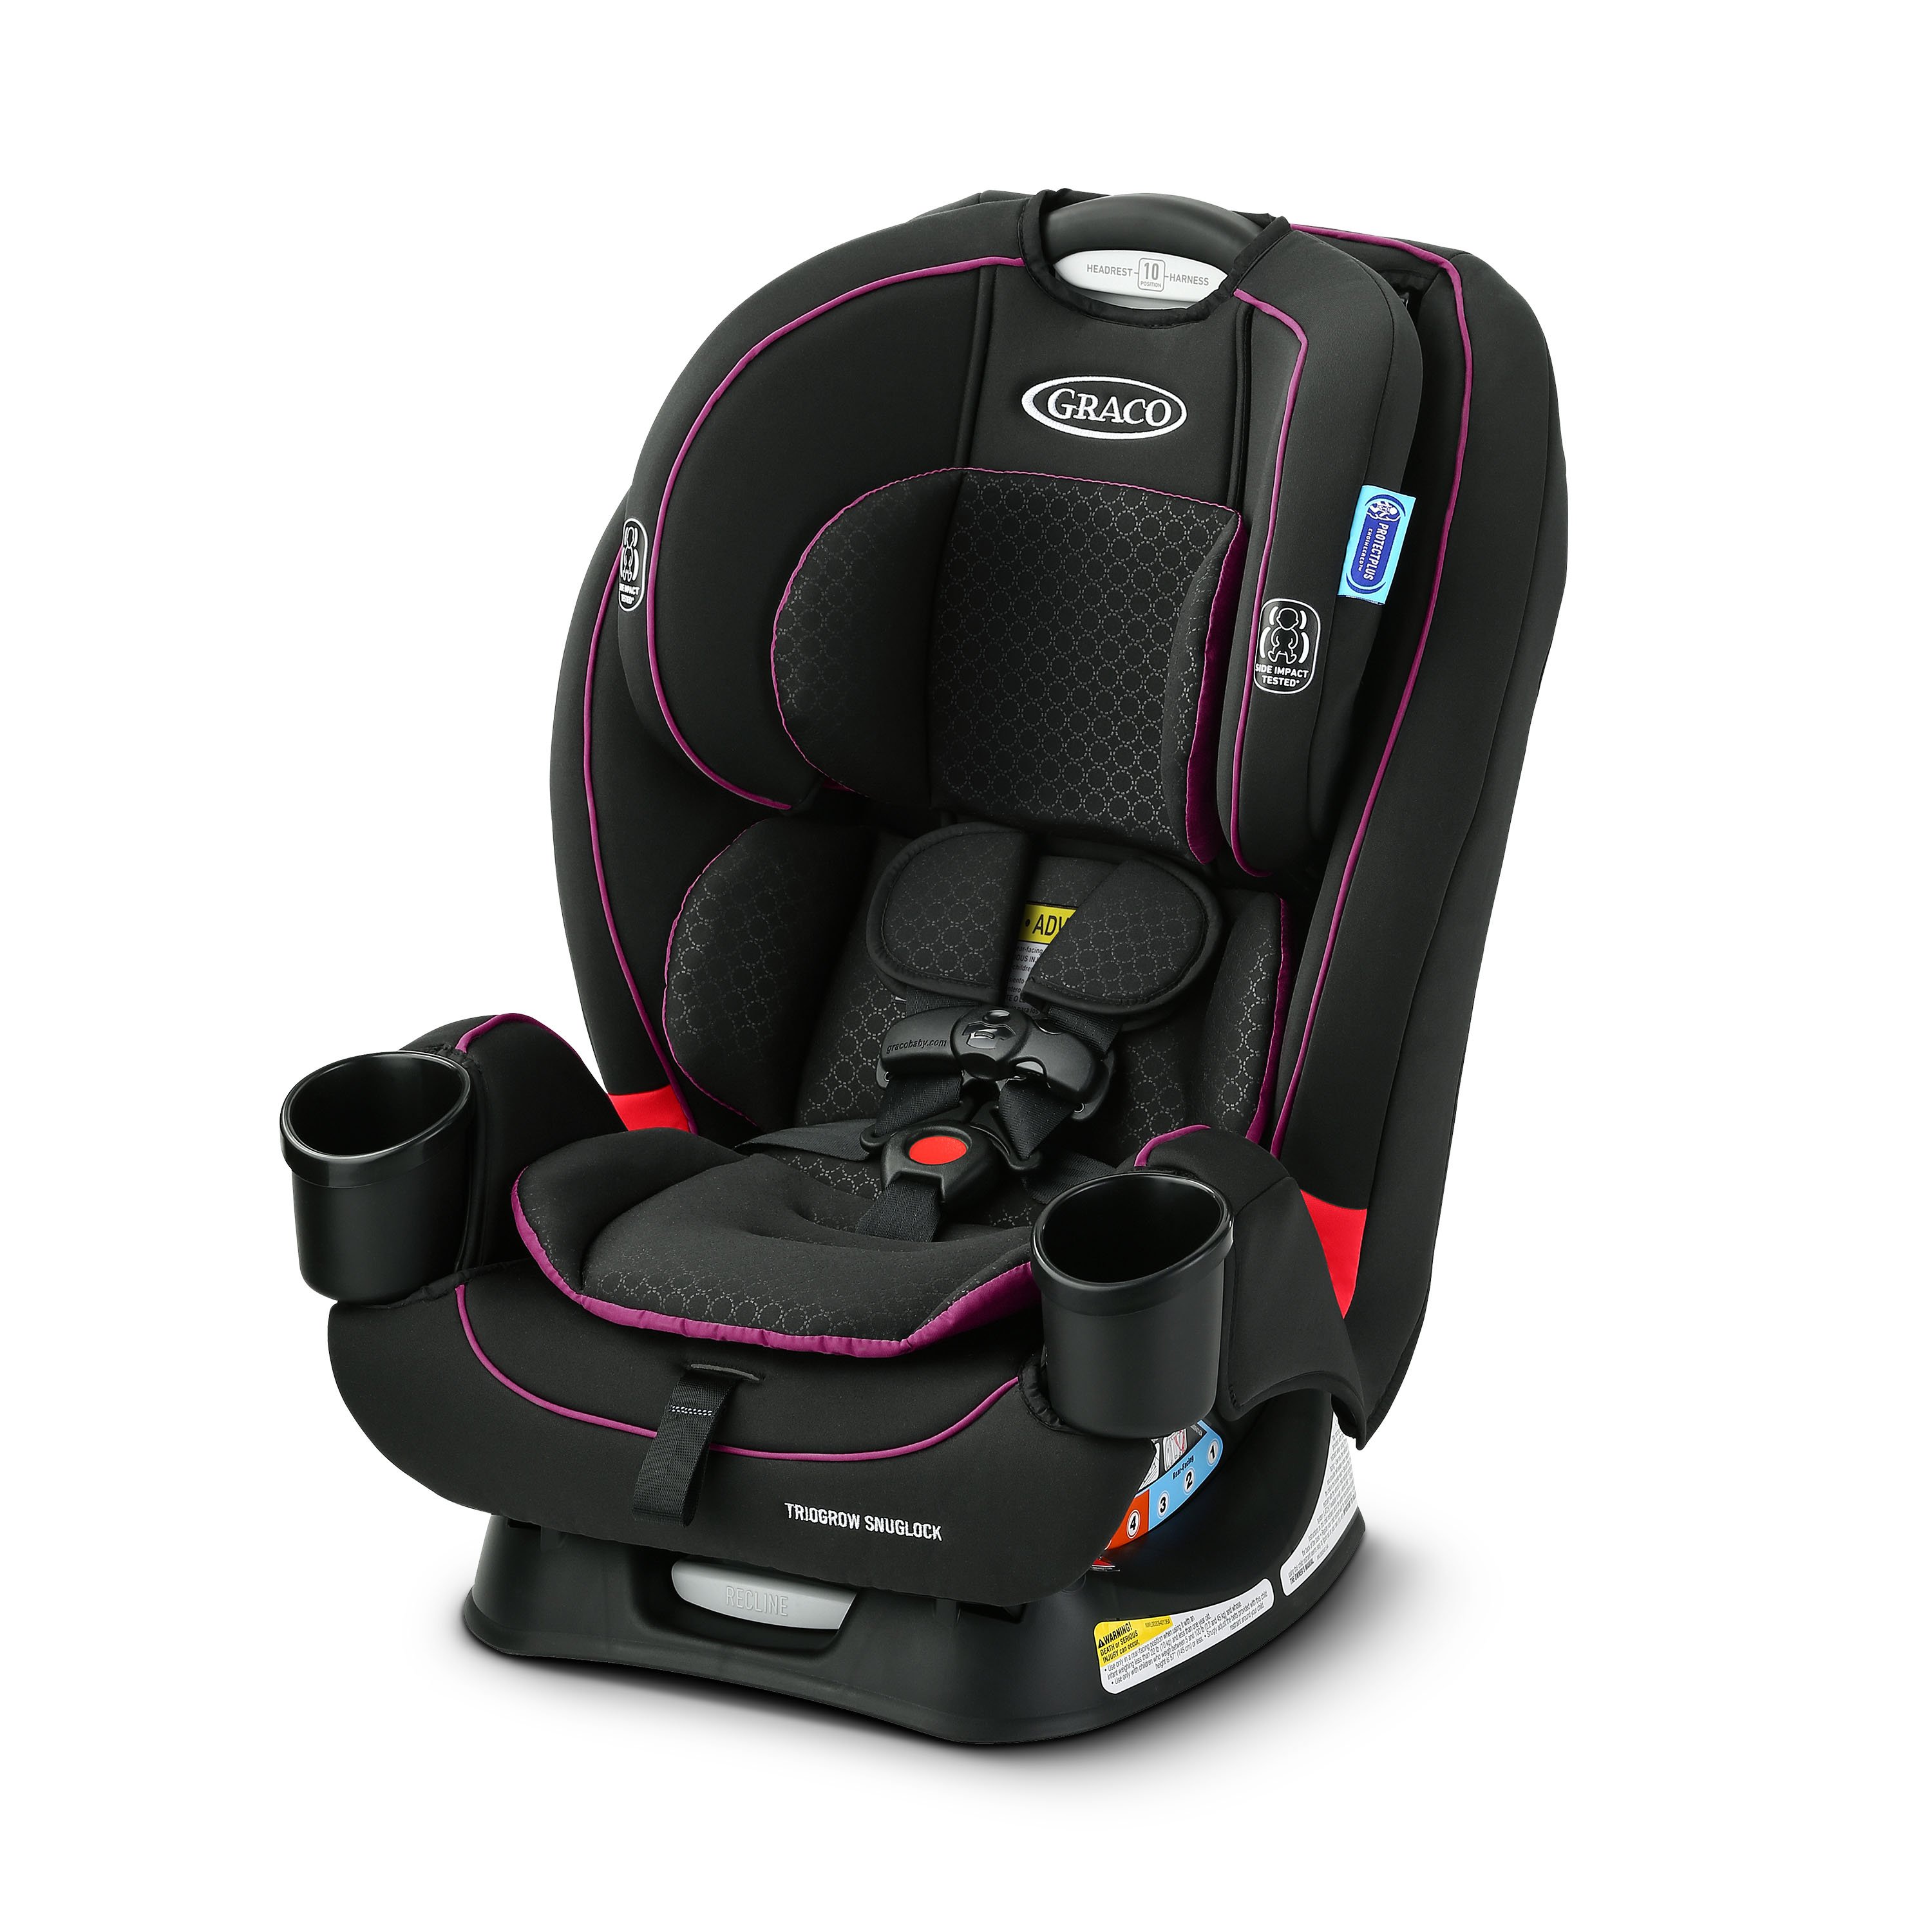 Why Aftermarket Car Seat Accessories Are So Unsafe